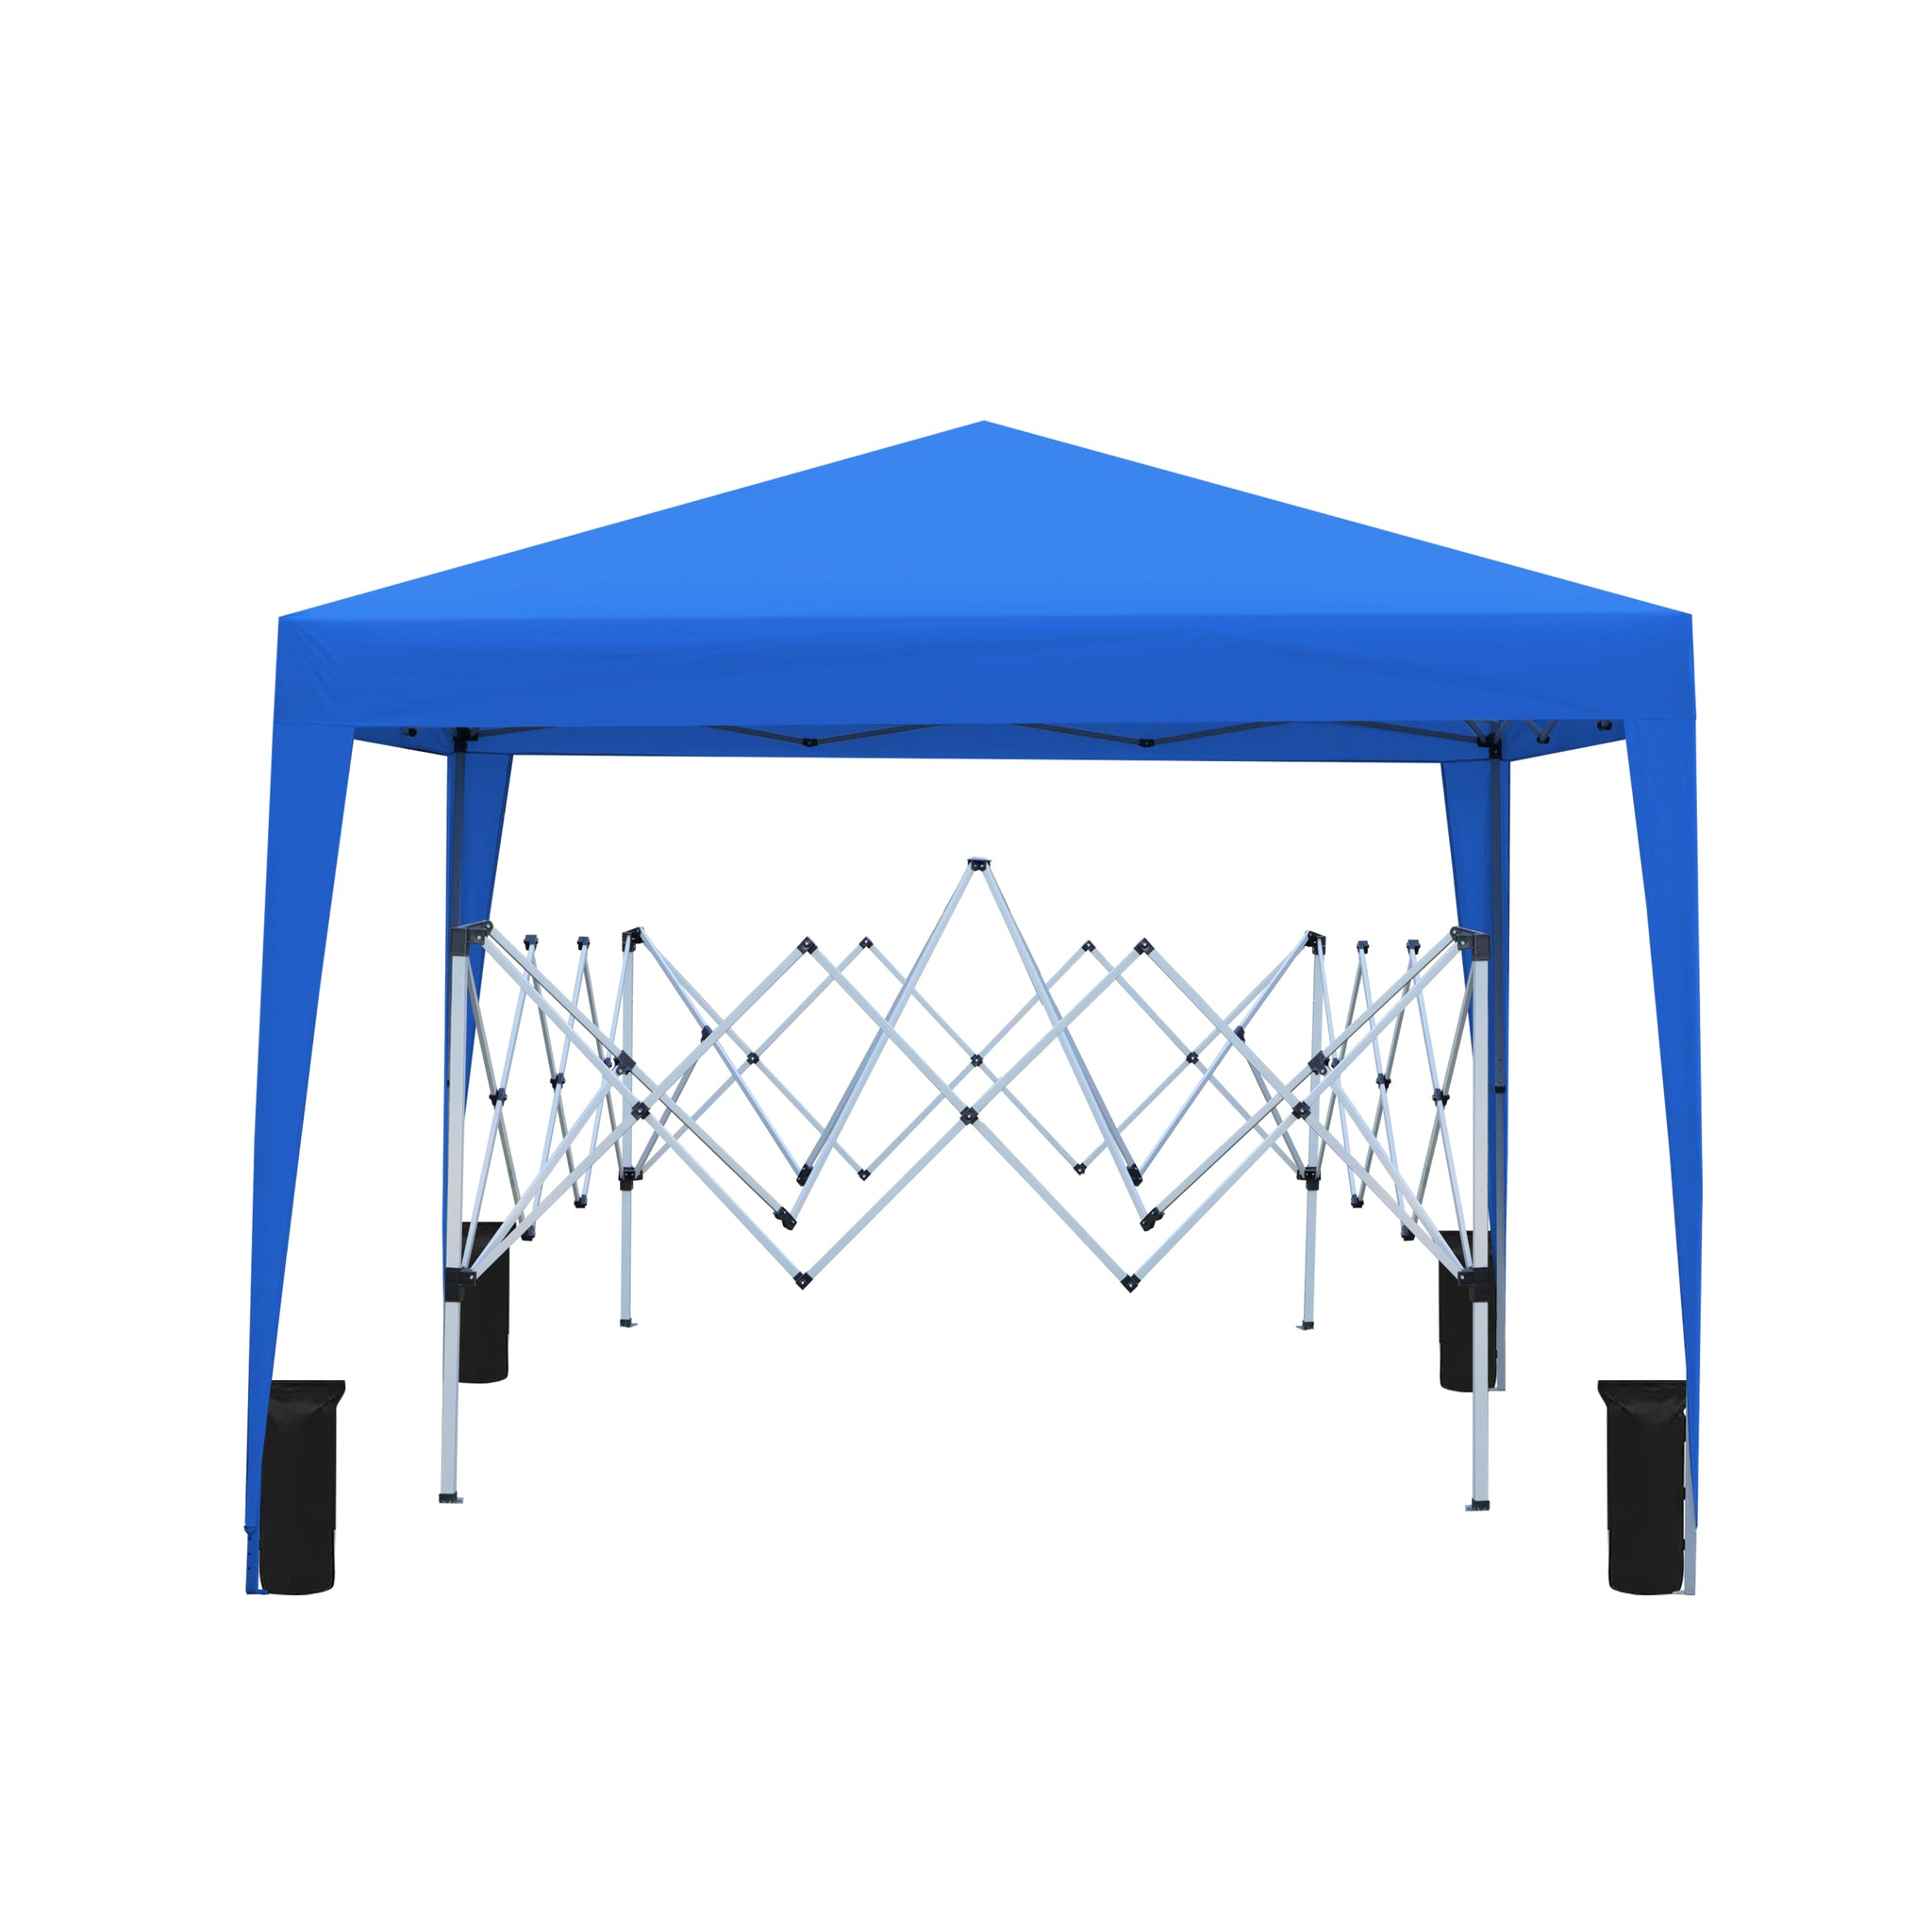 Outdoor 10x 10Ft Pop Up Gazebo Tent Canopy with 4pcs blue-metal